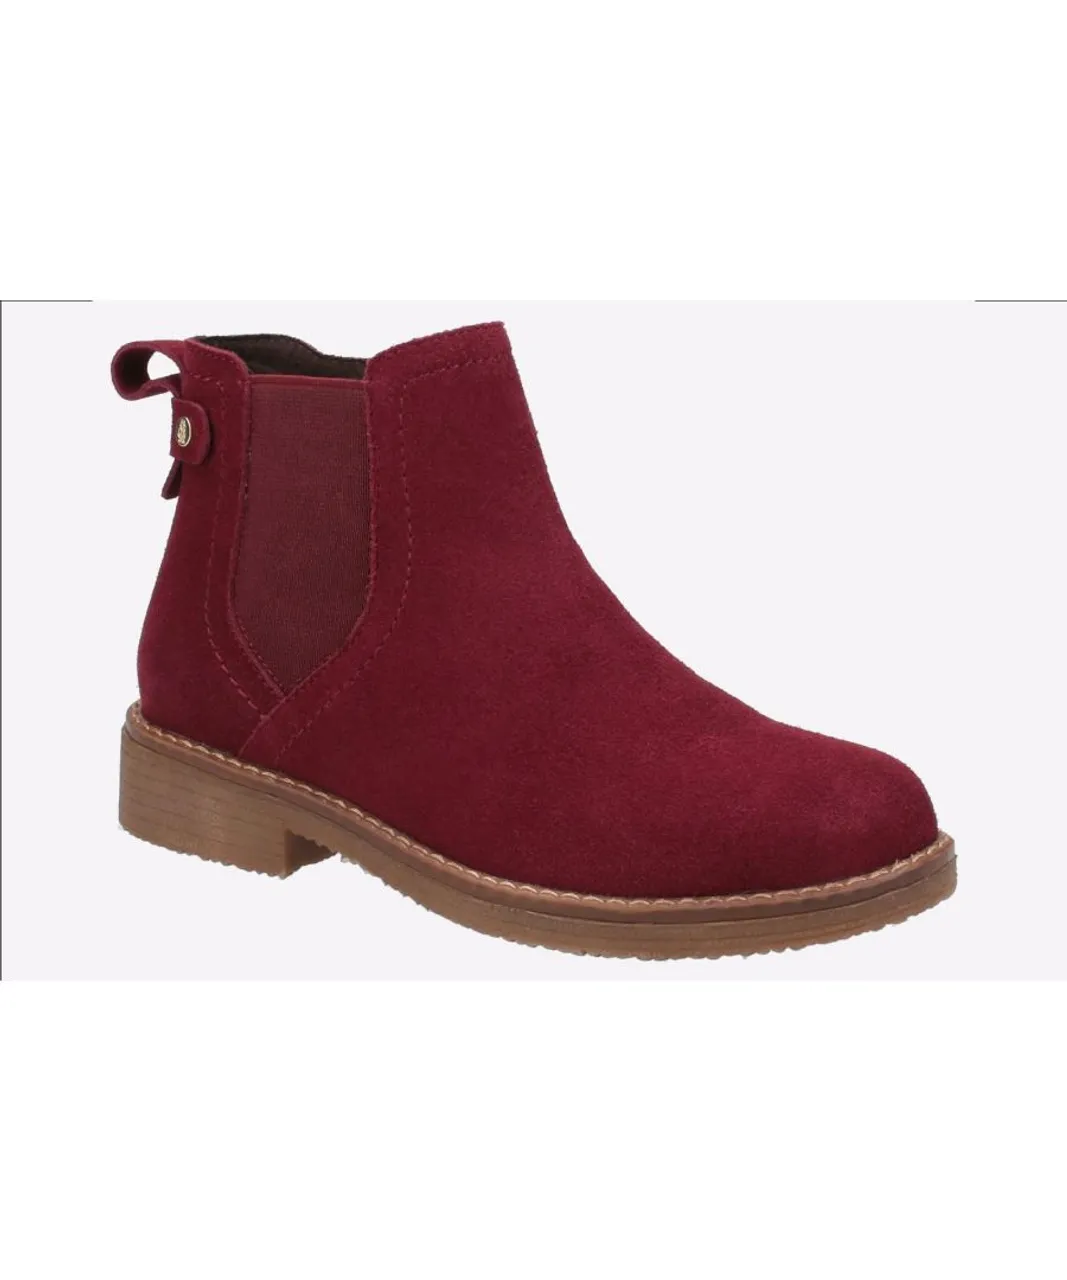 Hush Puppies Maddy MEMORY FOAM Leather Womens Burgundy Chelsea Boots